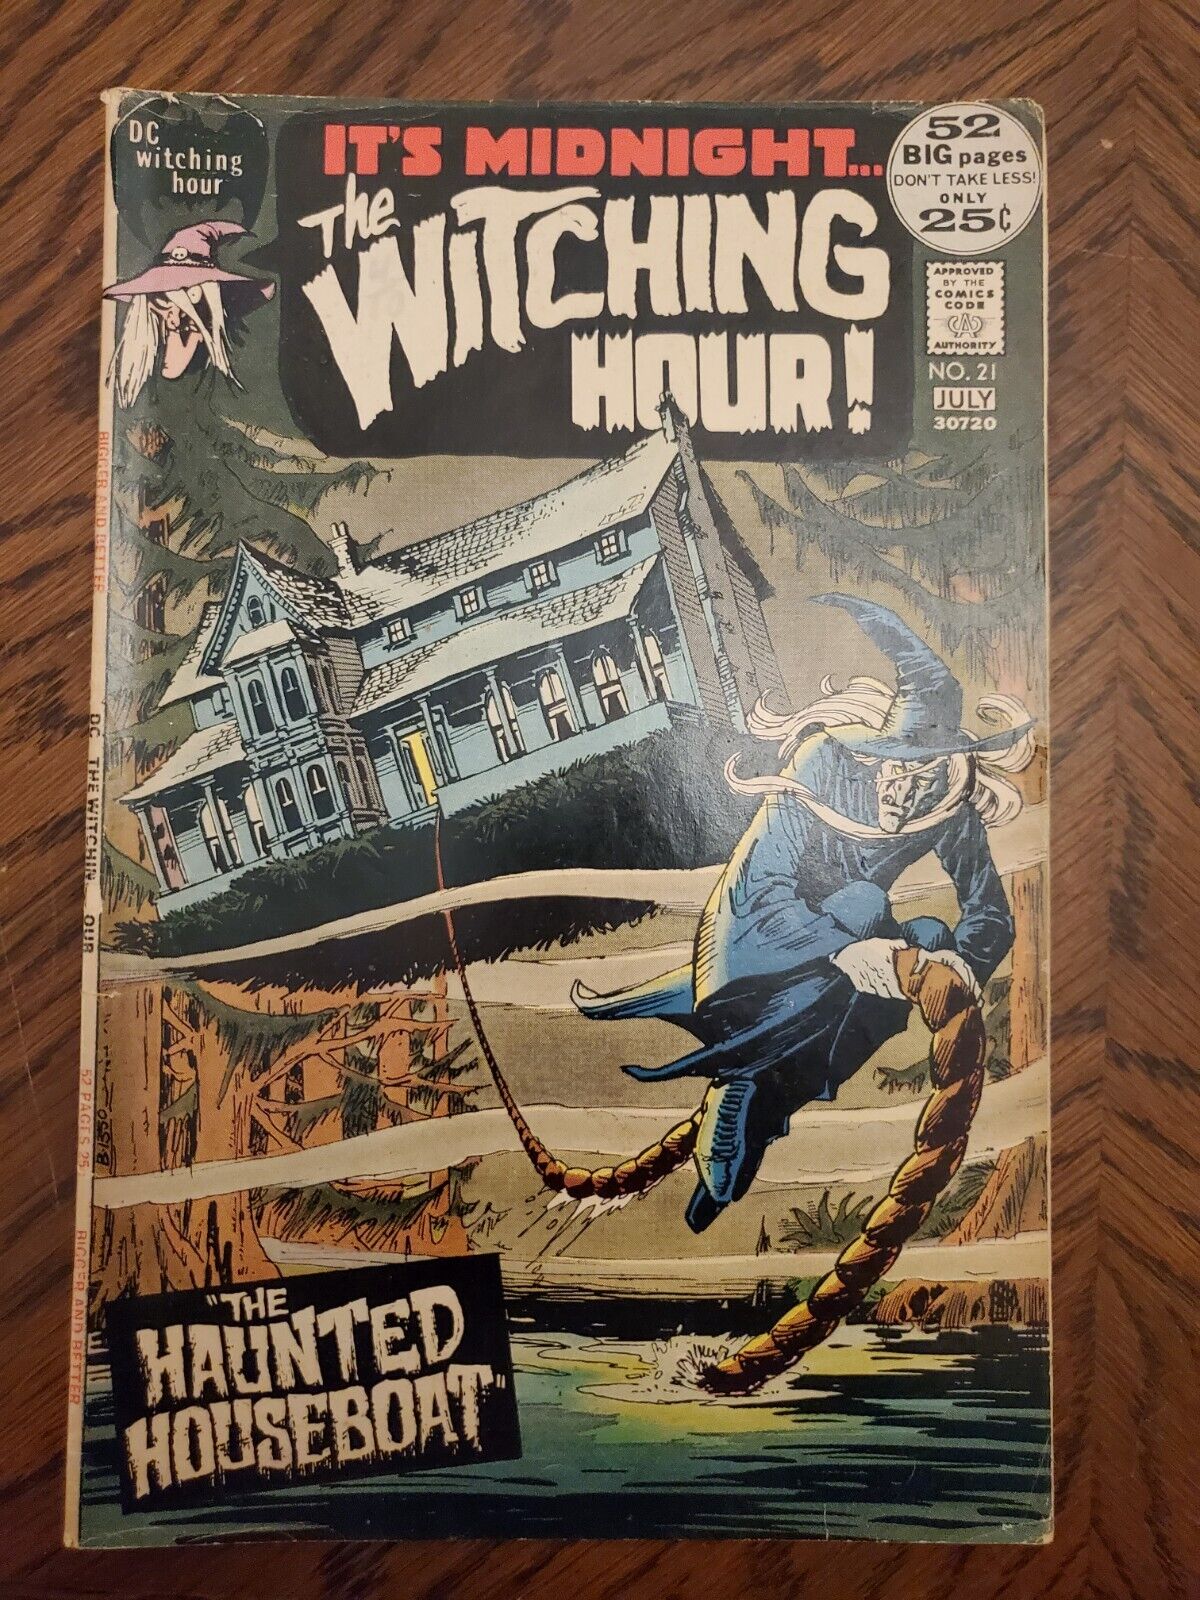 DC Comics THE WITCHING HOUR #21- Bronze Age - Horror - 1972